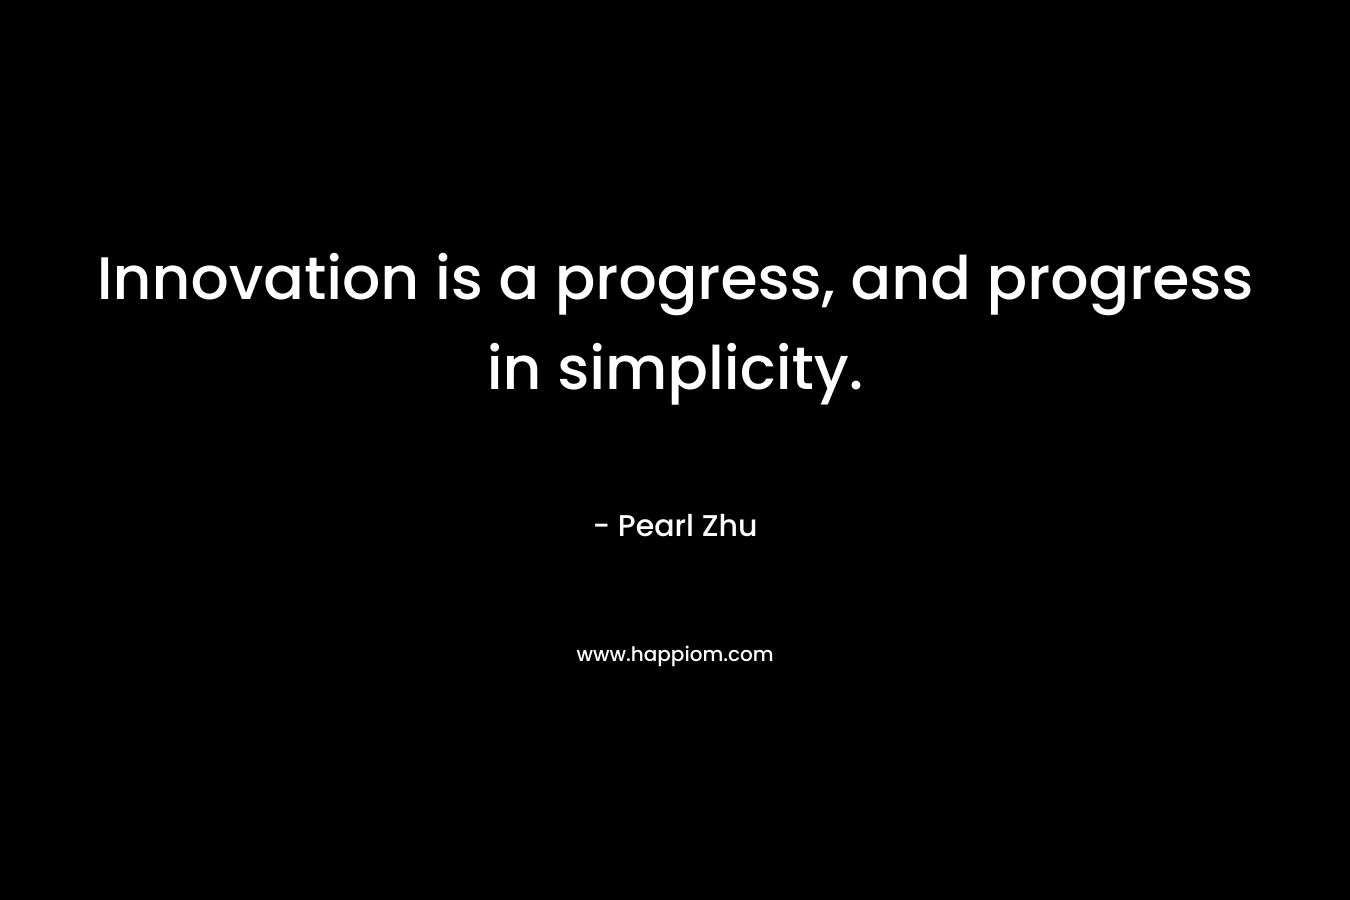 Innovation is a progress, and progress in simplicity. – Pearl Zhu